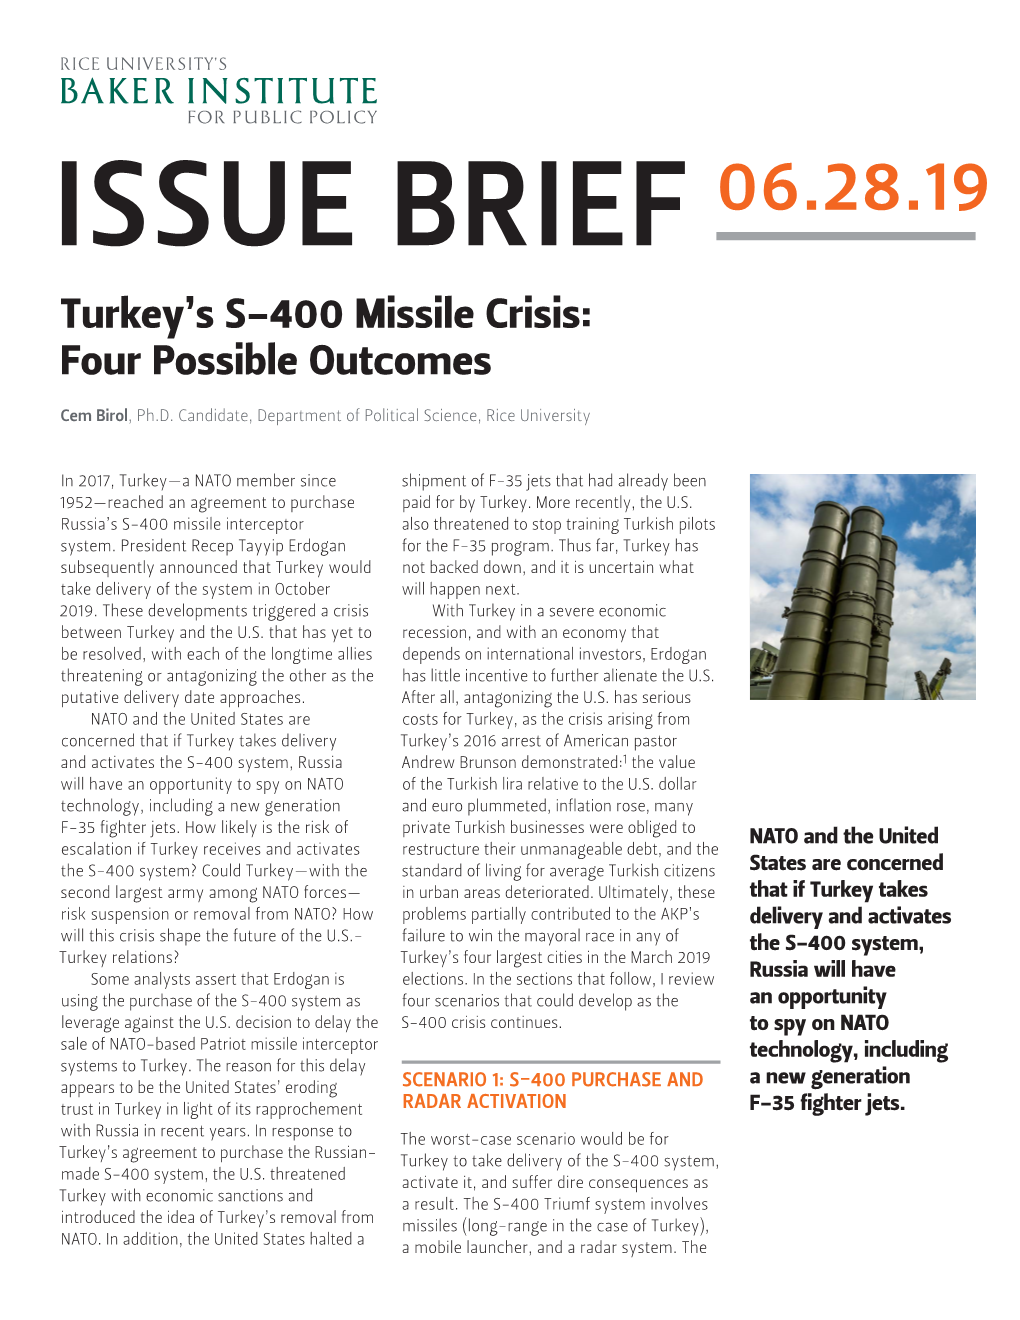 Turkey's S-400 Missile Crisis: Four Possible Outcomes